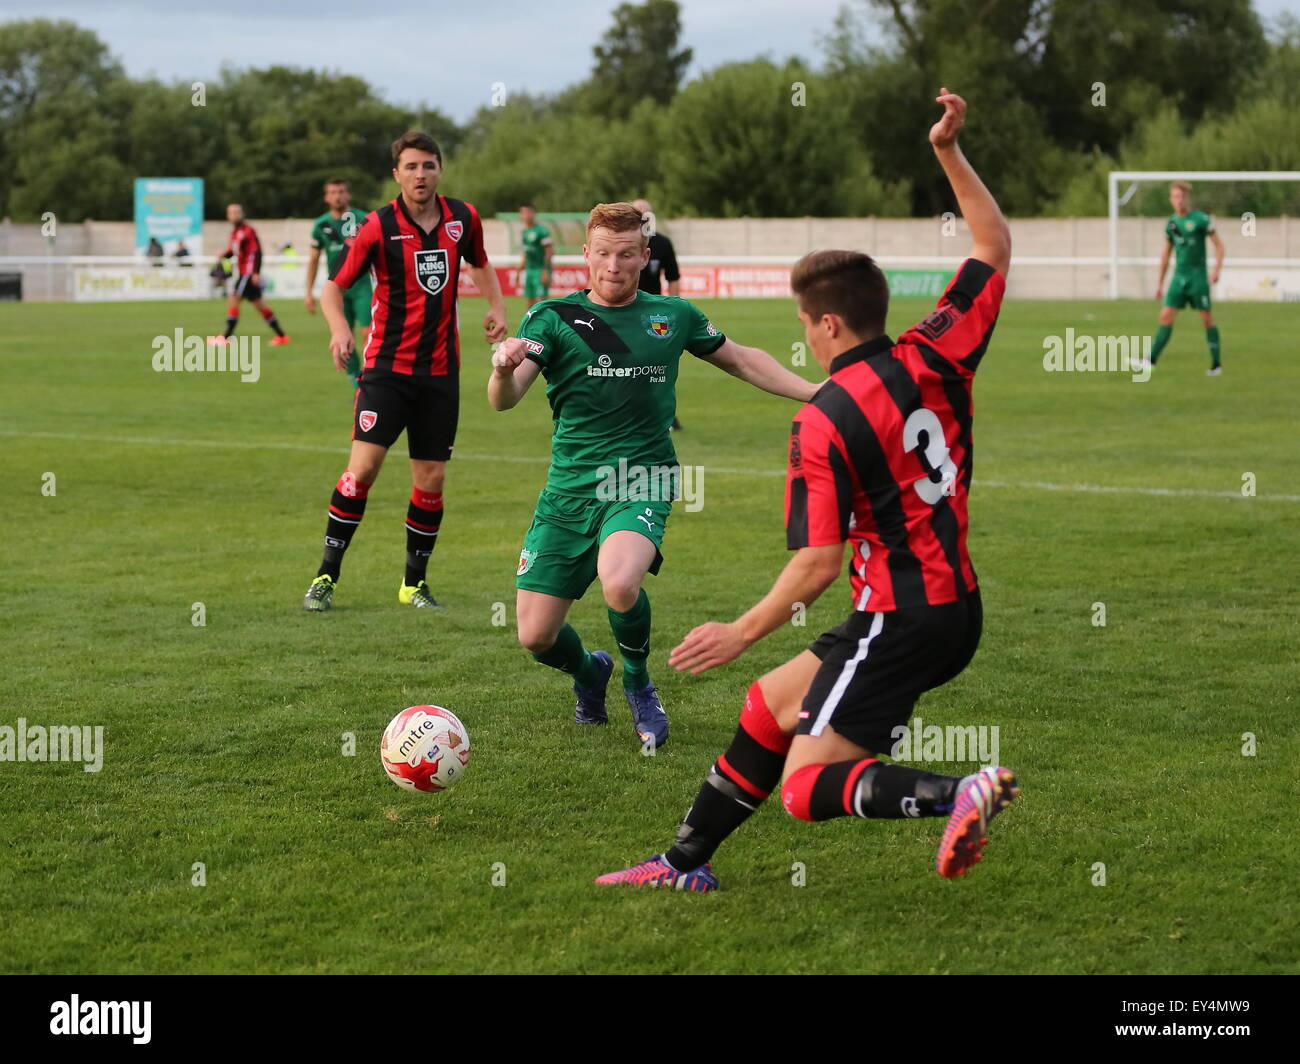 Nantwich, Cheshire, UK. 21st July, 2015. Nantwich Town entertain League Two Morecambe in a pre season friendly at The Weaver Stadium. Morecambe ran out 6-0 victors. Nantwich Town's Chris Smith closes in on Morecambe's Aaron McGowan. Credit:  SJN/Alamy Live News Stock Photo